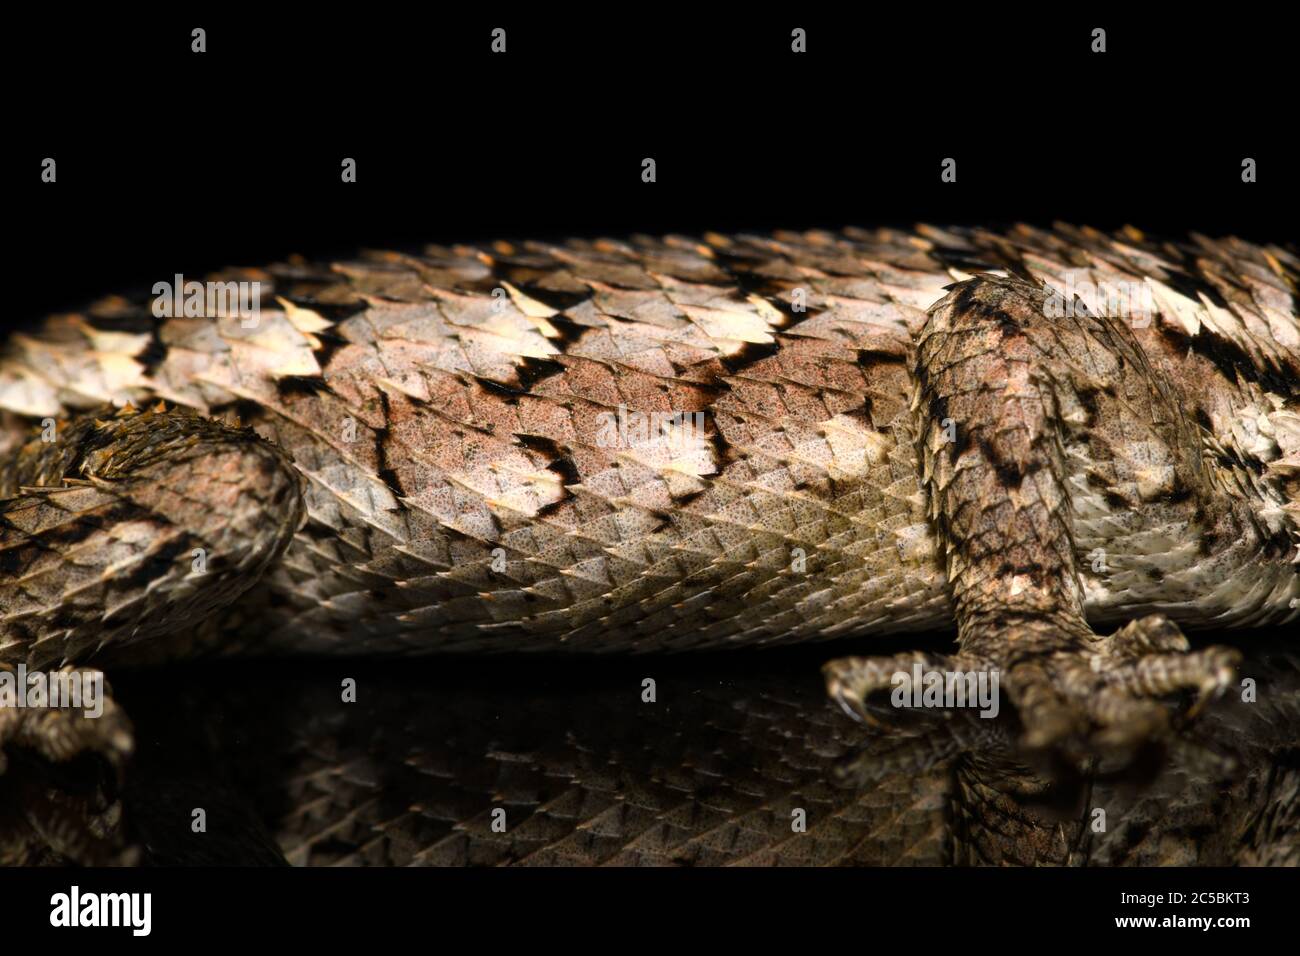 Texas spiny lizard (Sceloporus olivaceus) On black close-up side view of mid-section scales Stock Photo